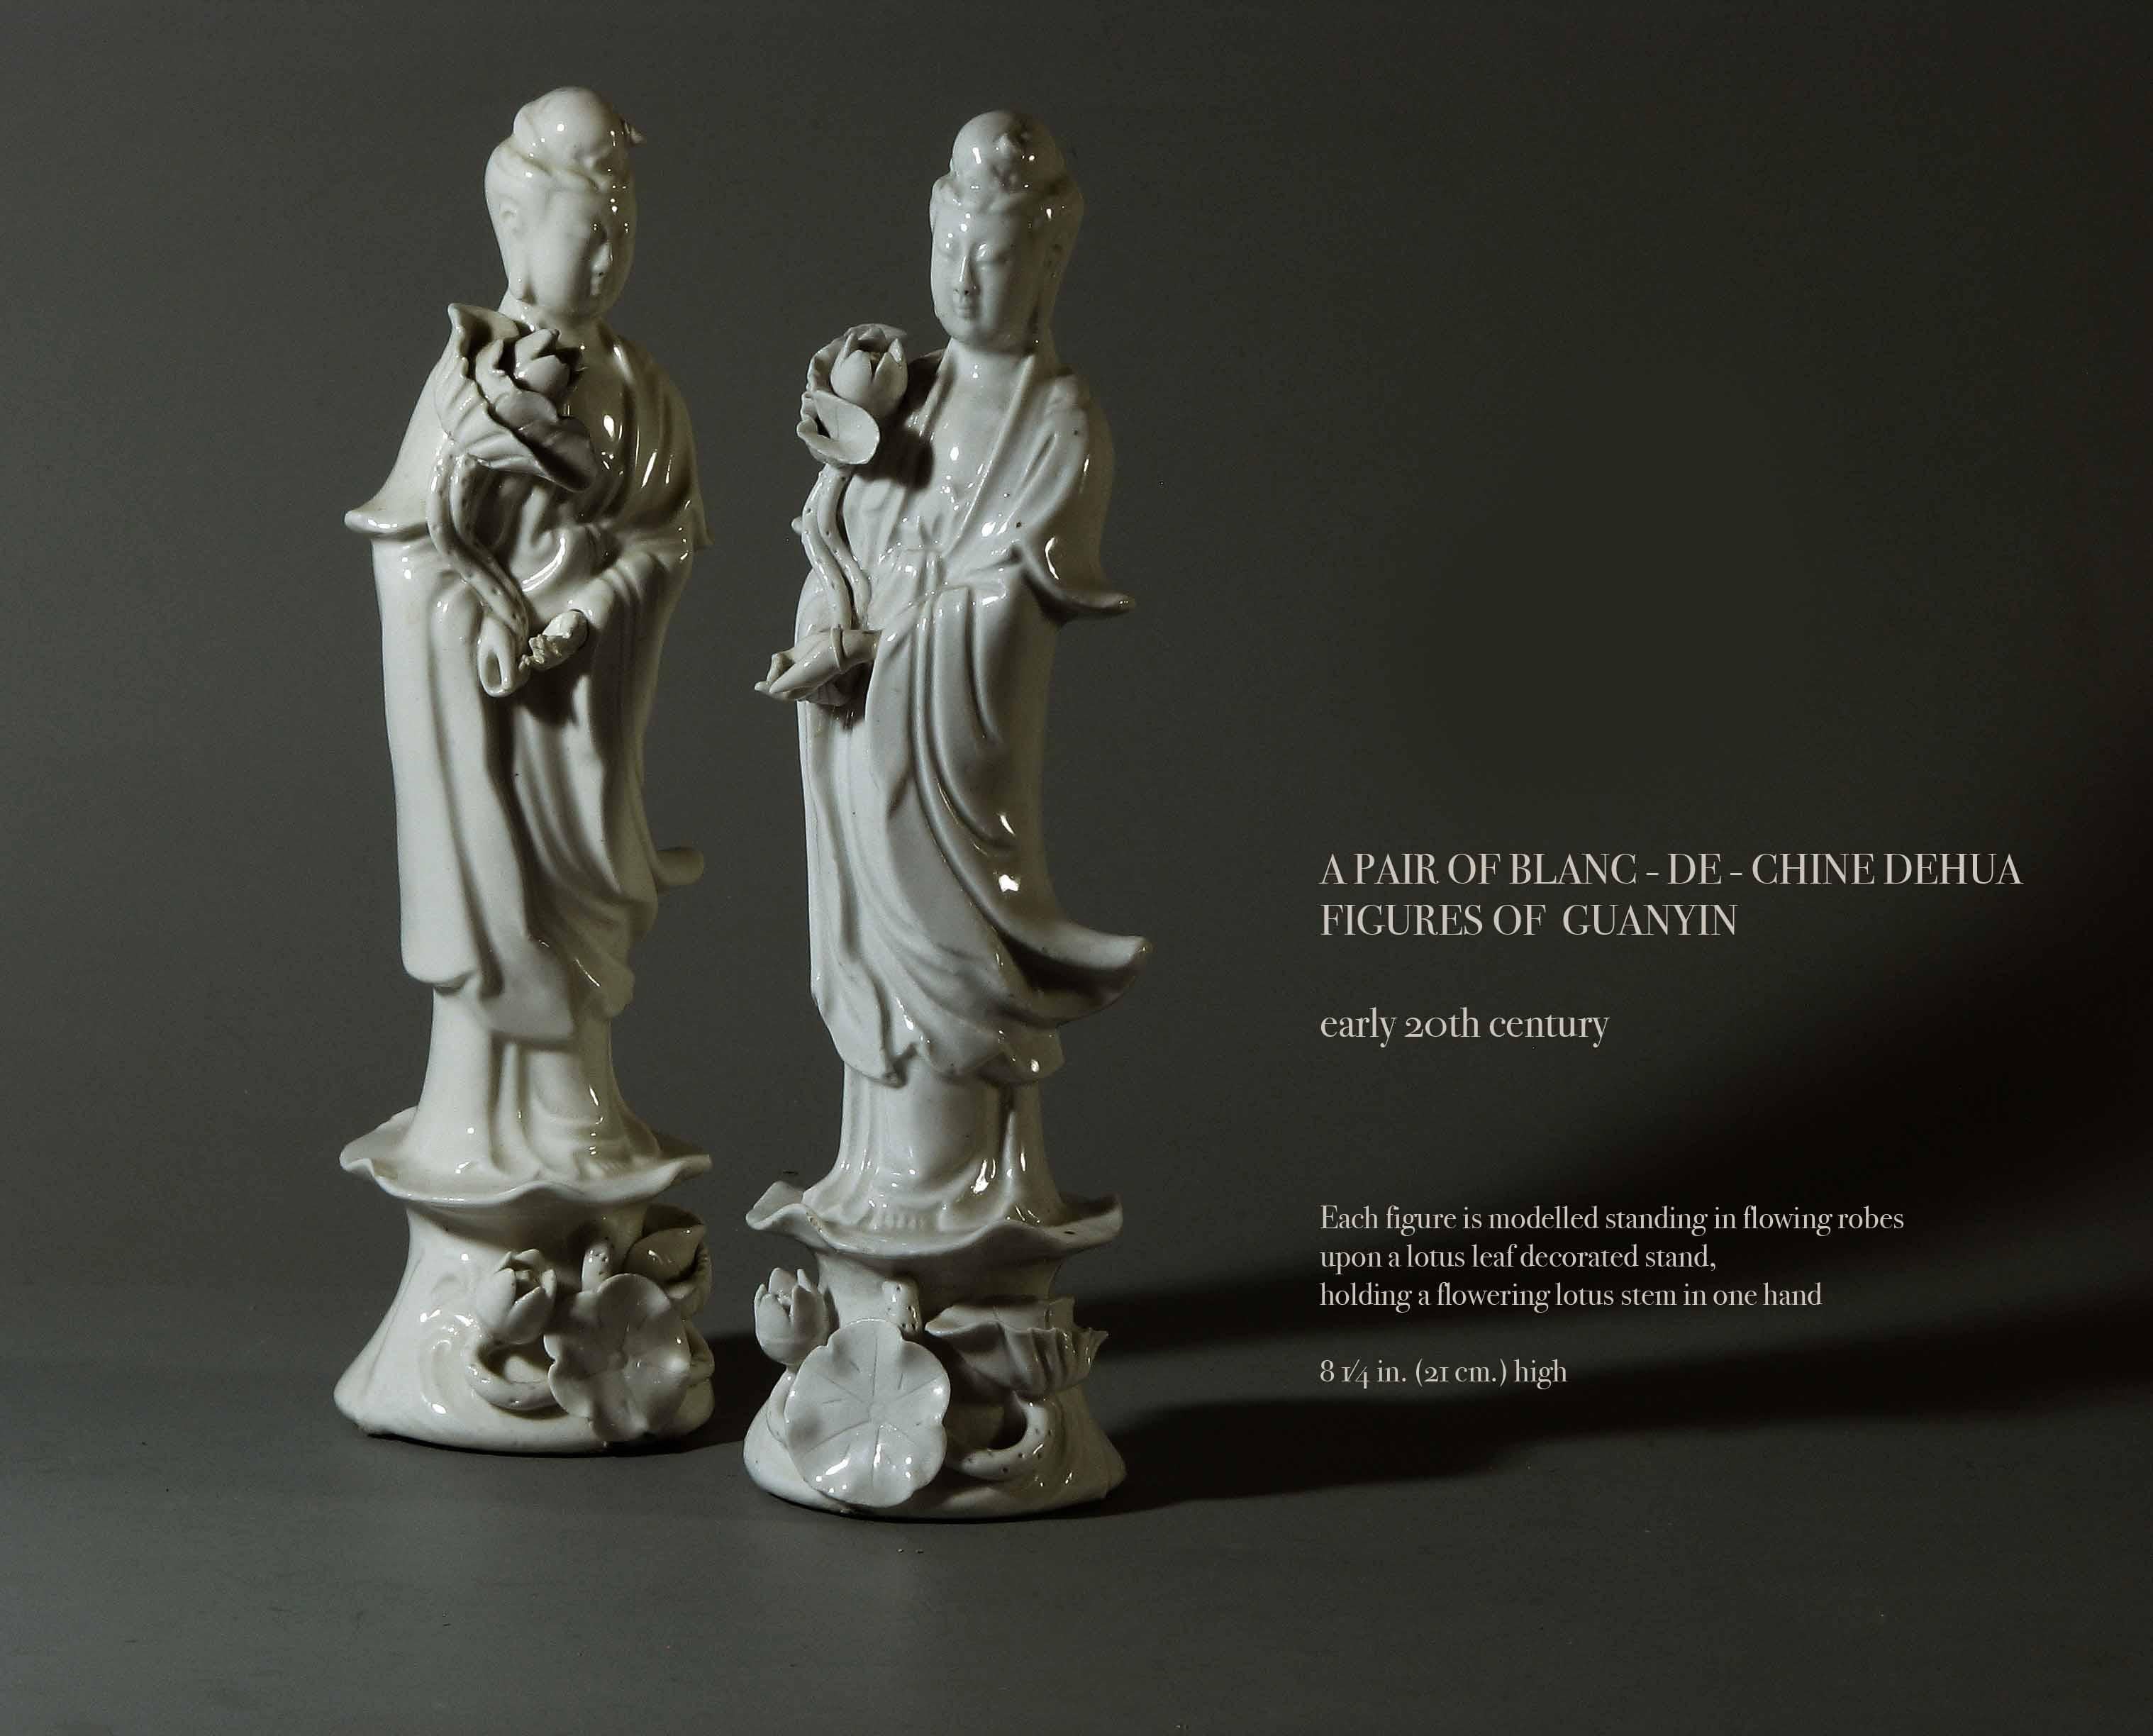 Hand-Crafted Pair of Blanc-de-Chine Dehua Figures of Guanyin For Sale